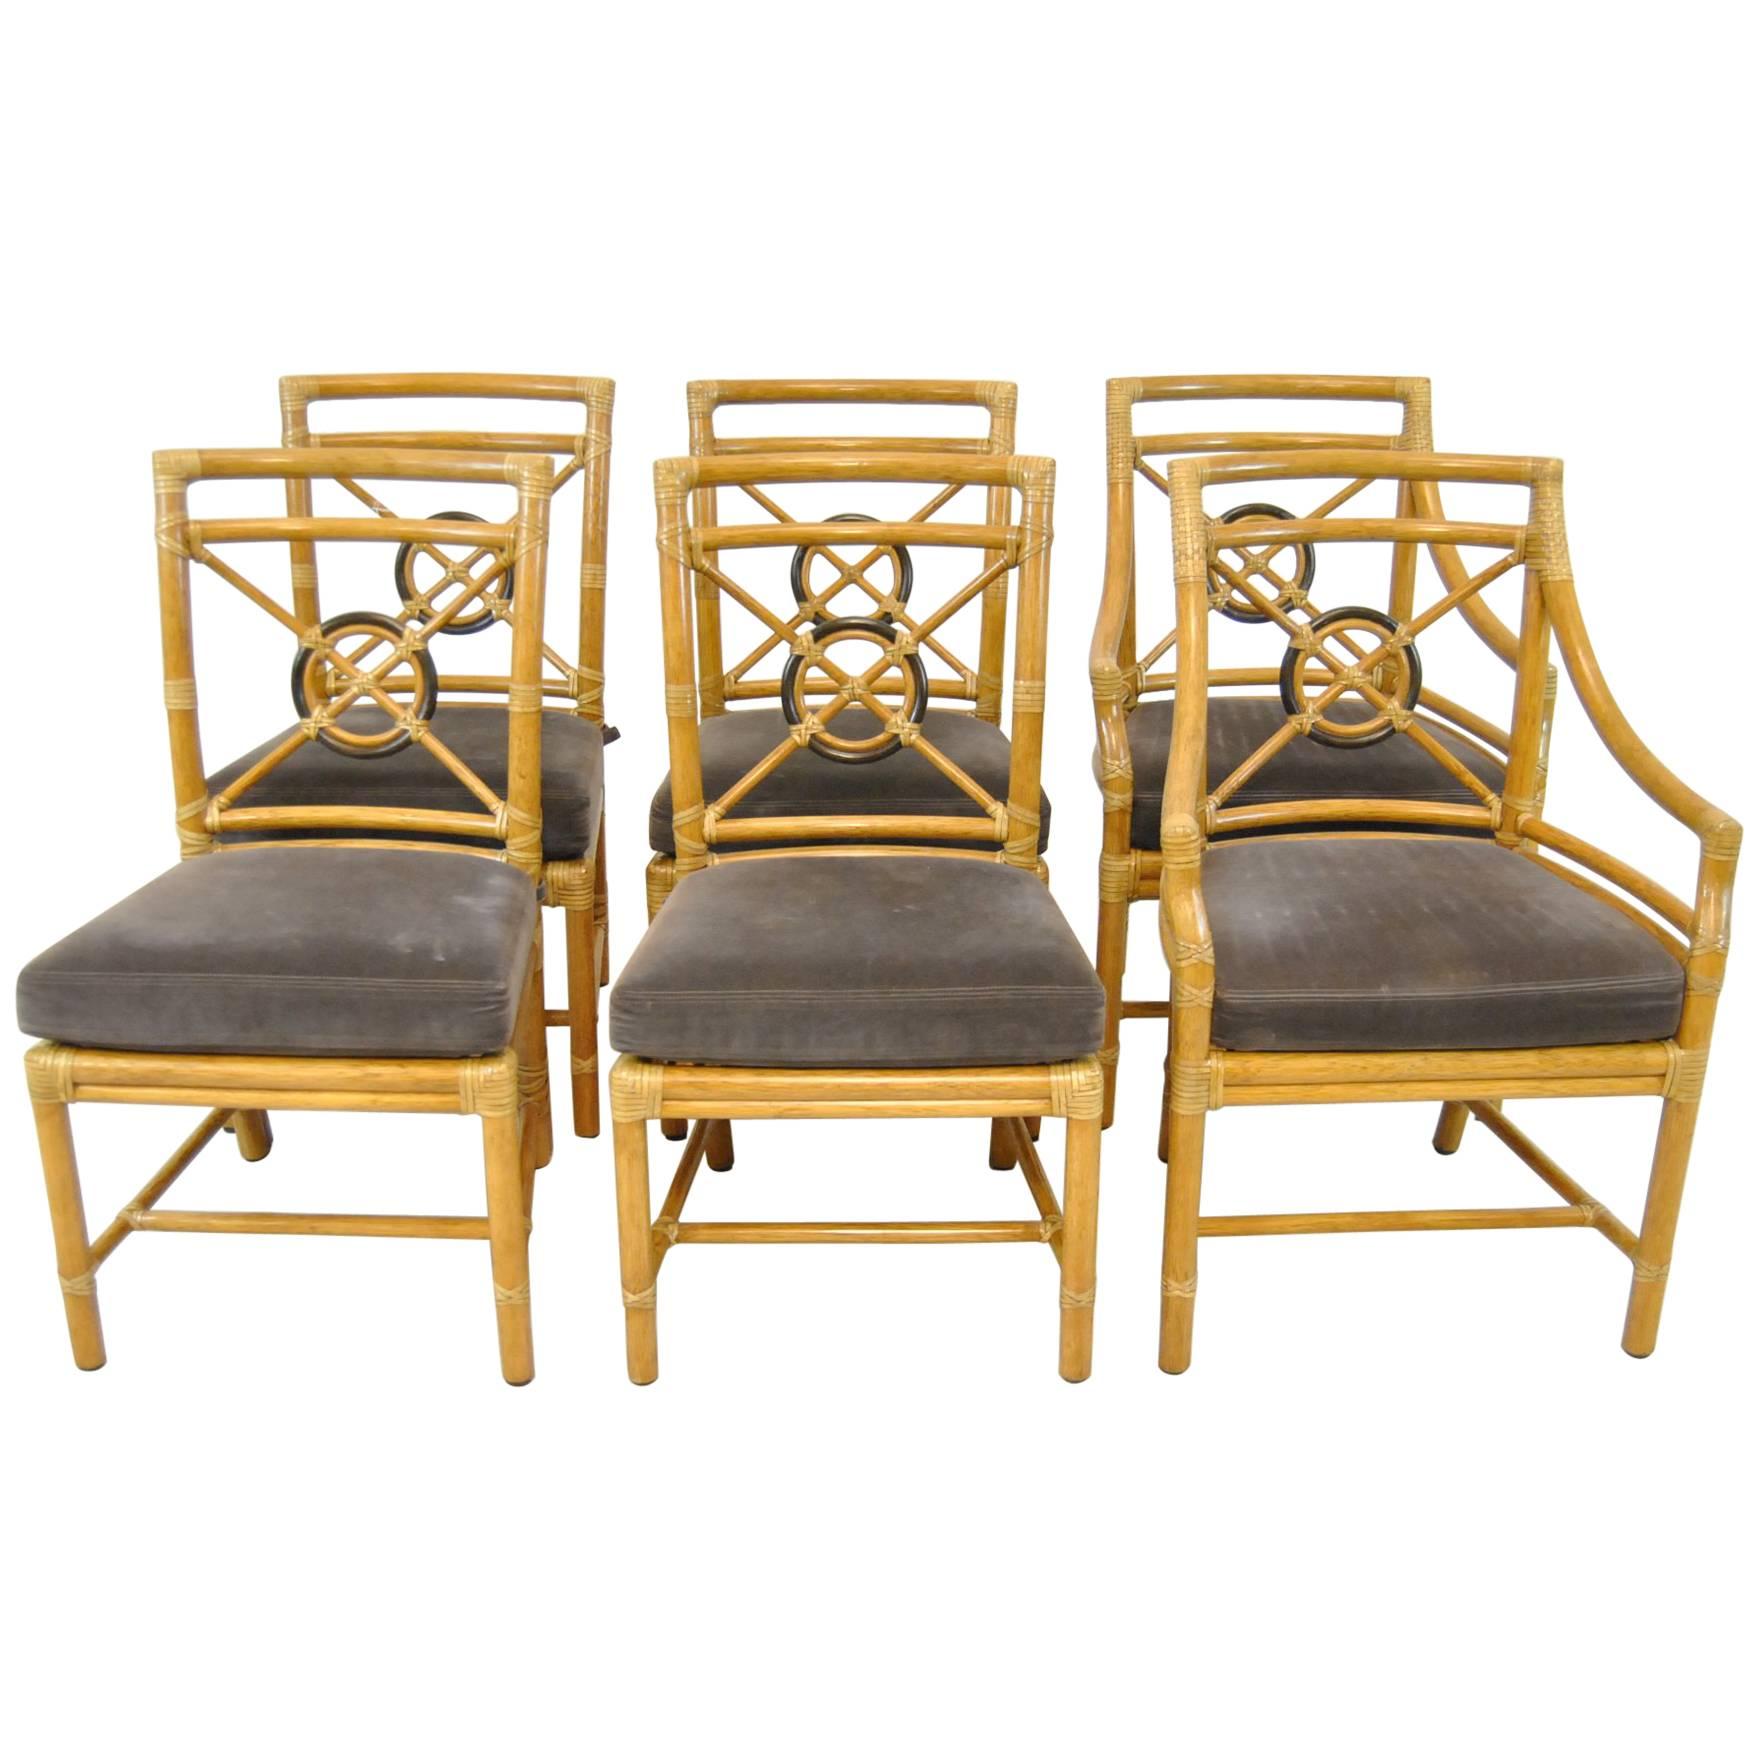 Set of Six Target Back Rattan Chairs by McGuire